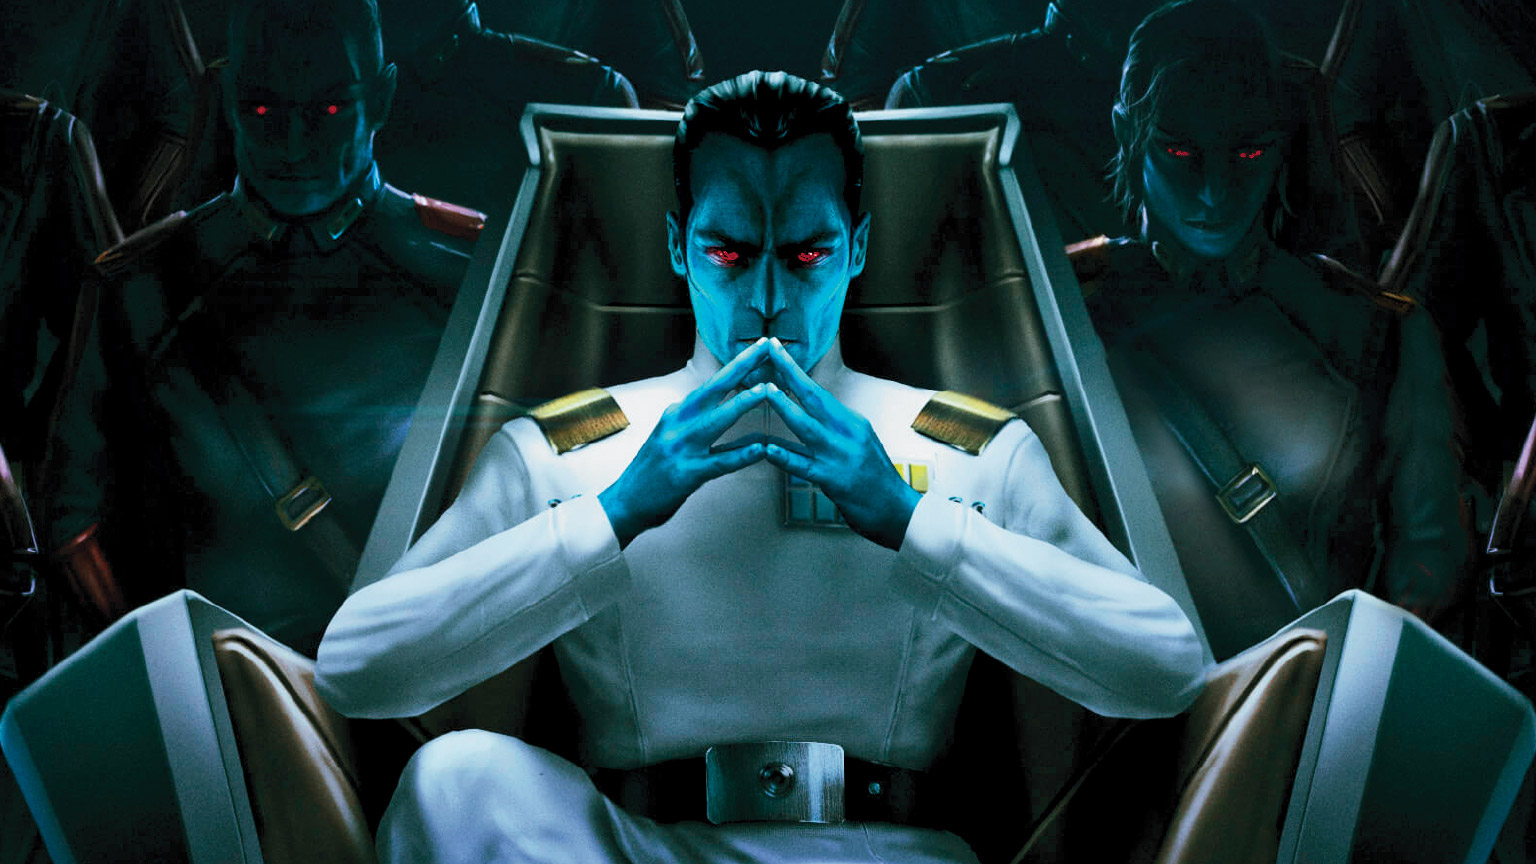 Thrawn, a person with blue skin, sits on a throne with steepled fingers in Thrawn Treason